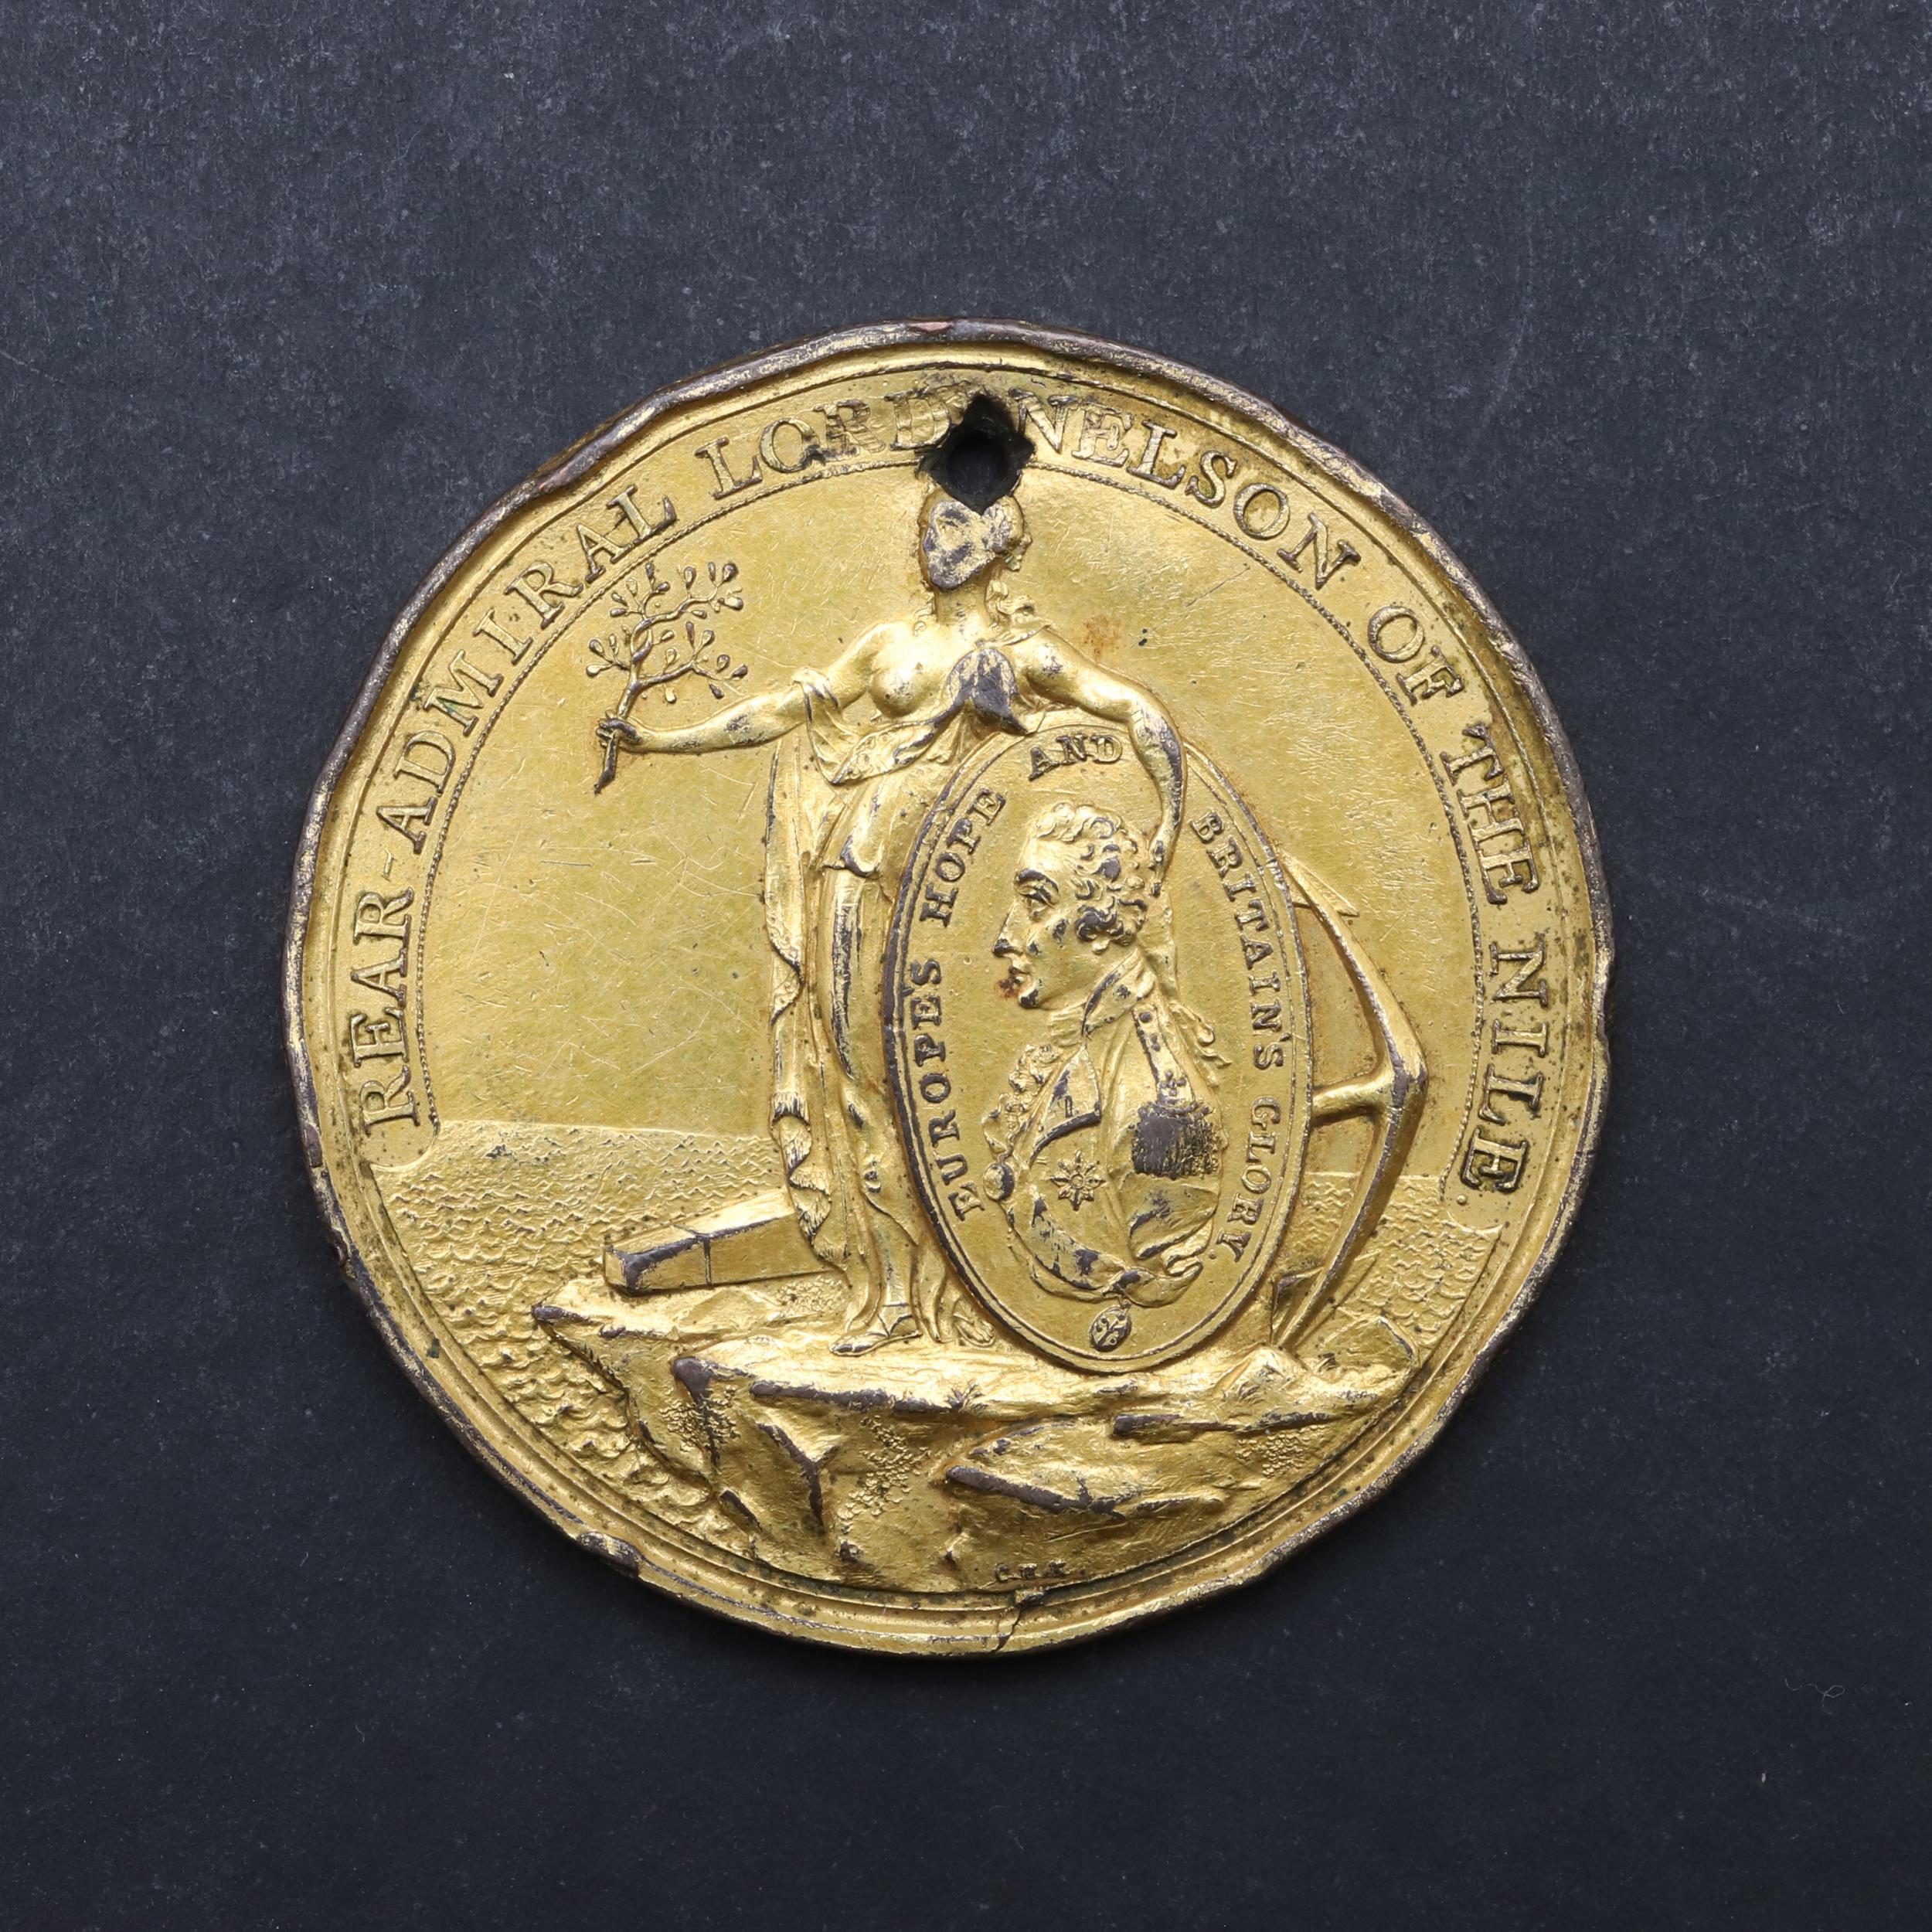 DAVISON'S MEDAL FOR THE BATTLE OF THE NILE, 1798, AWARDED TO THOMAS MATCHER, DEFENCE.